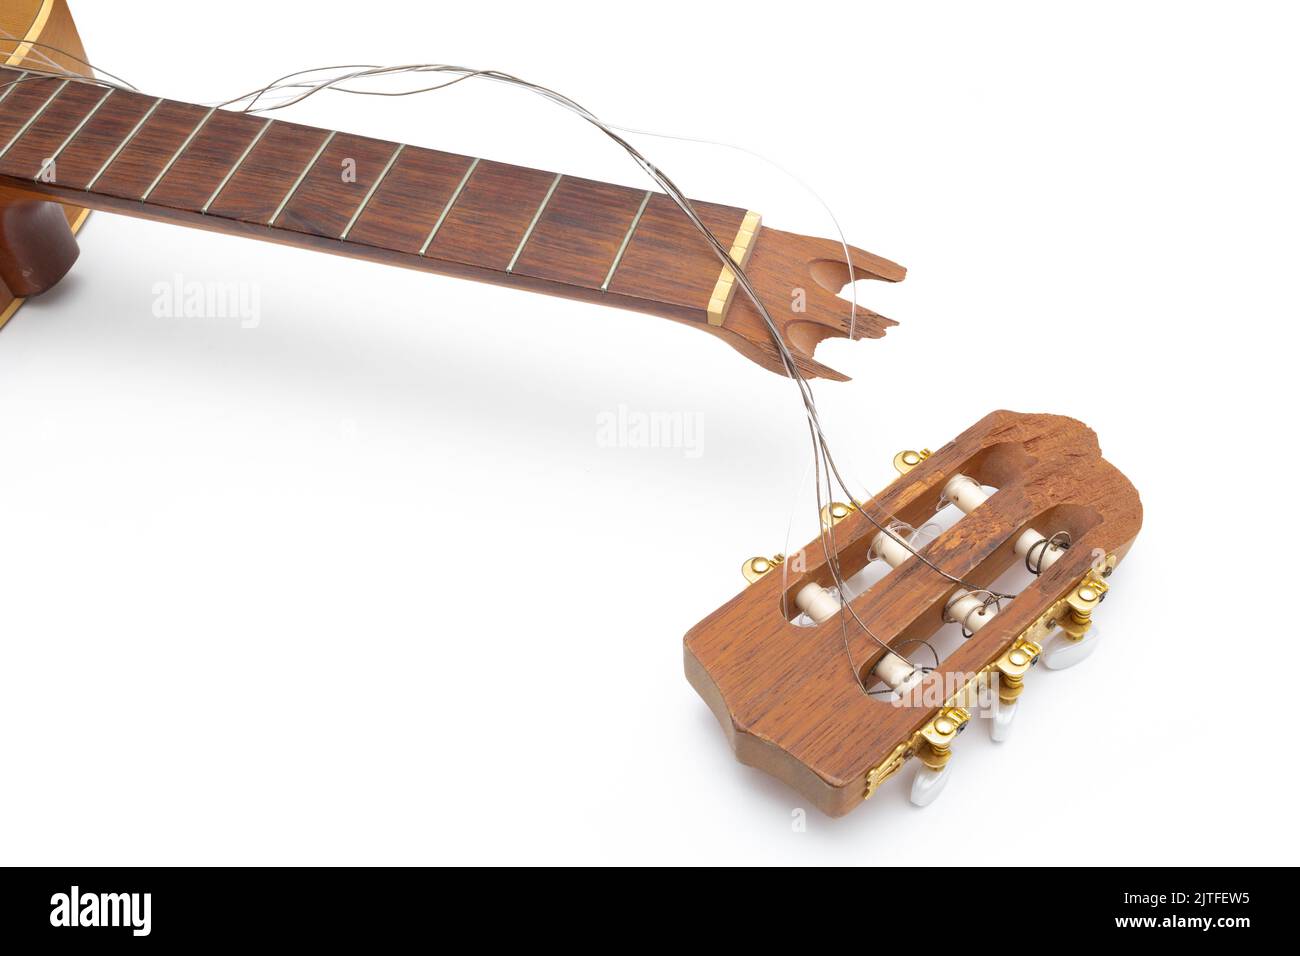 Classical acoustic guitar with broken headstock Stock Photo